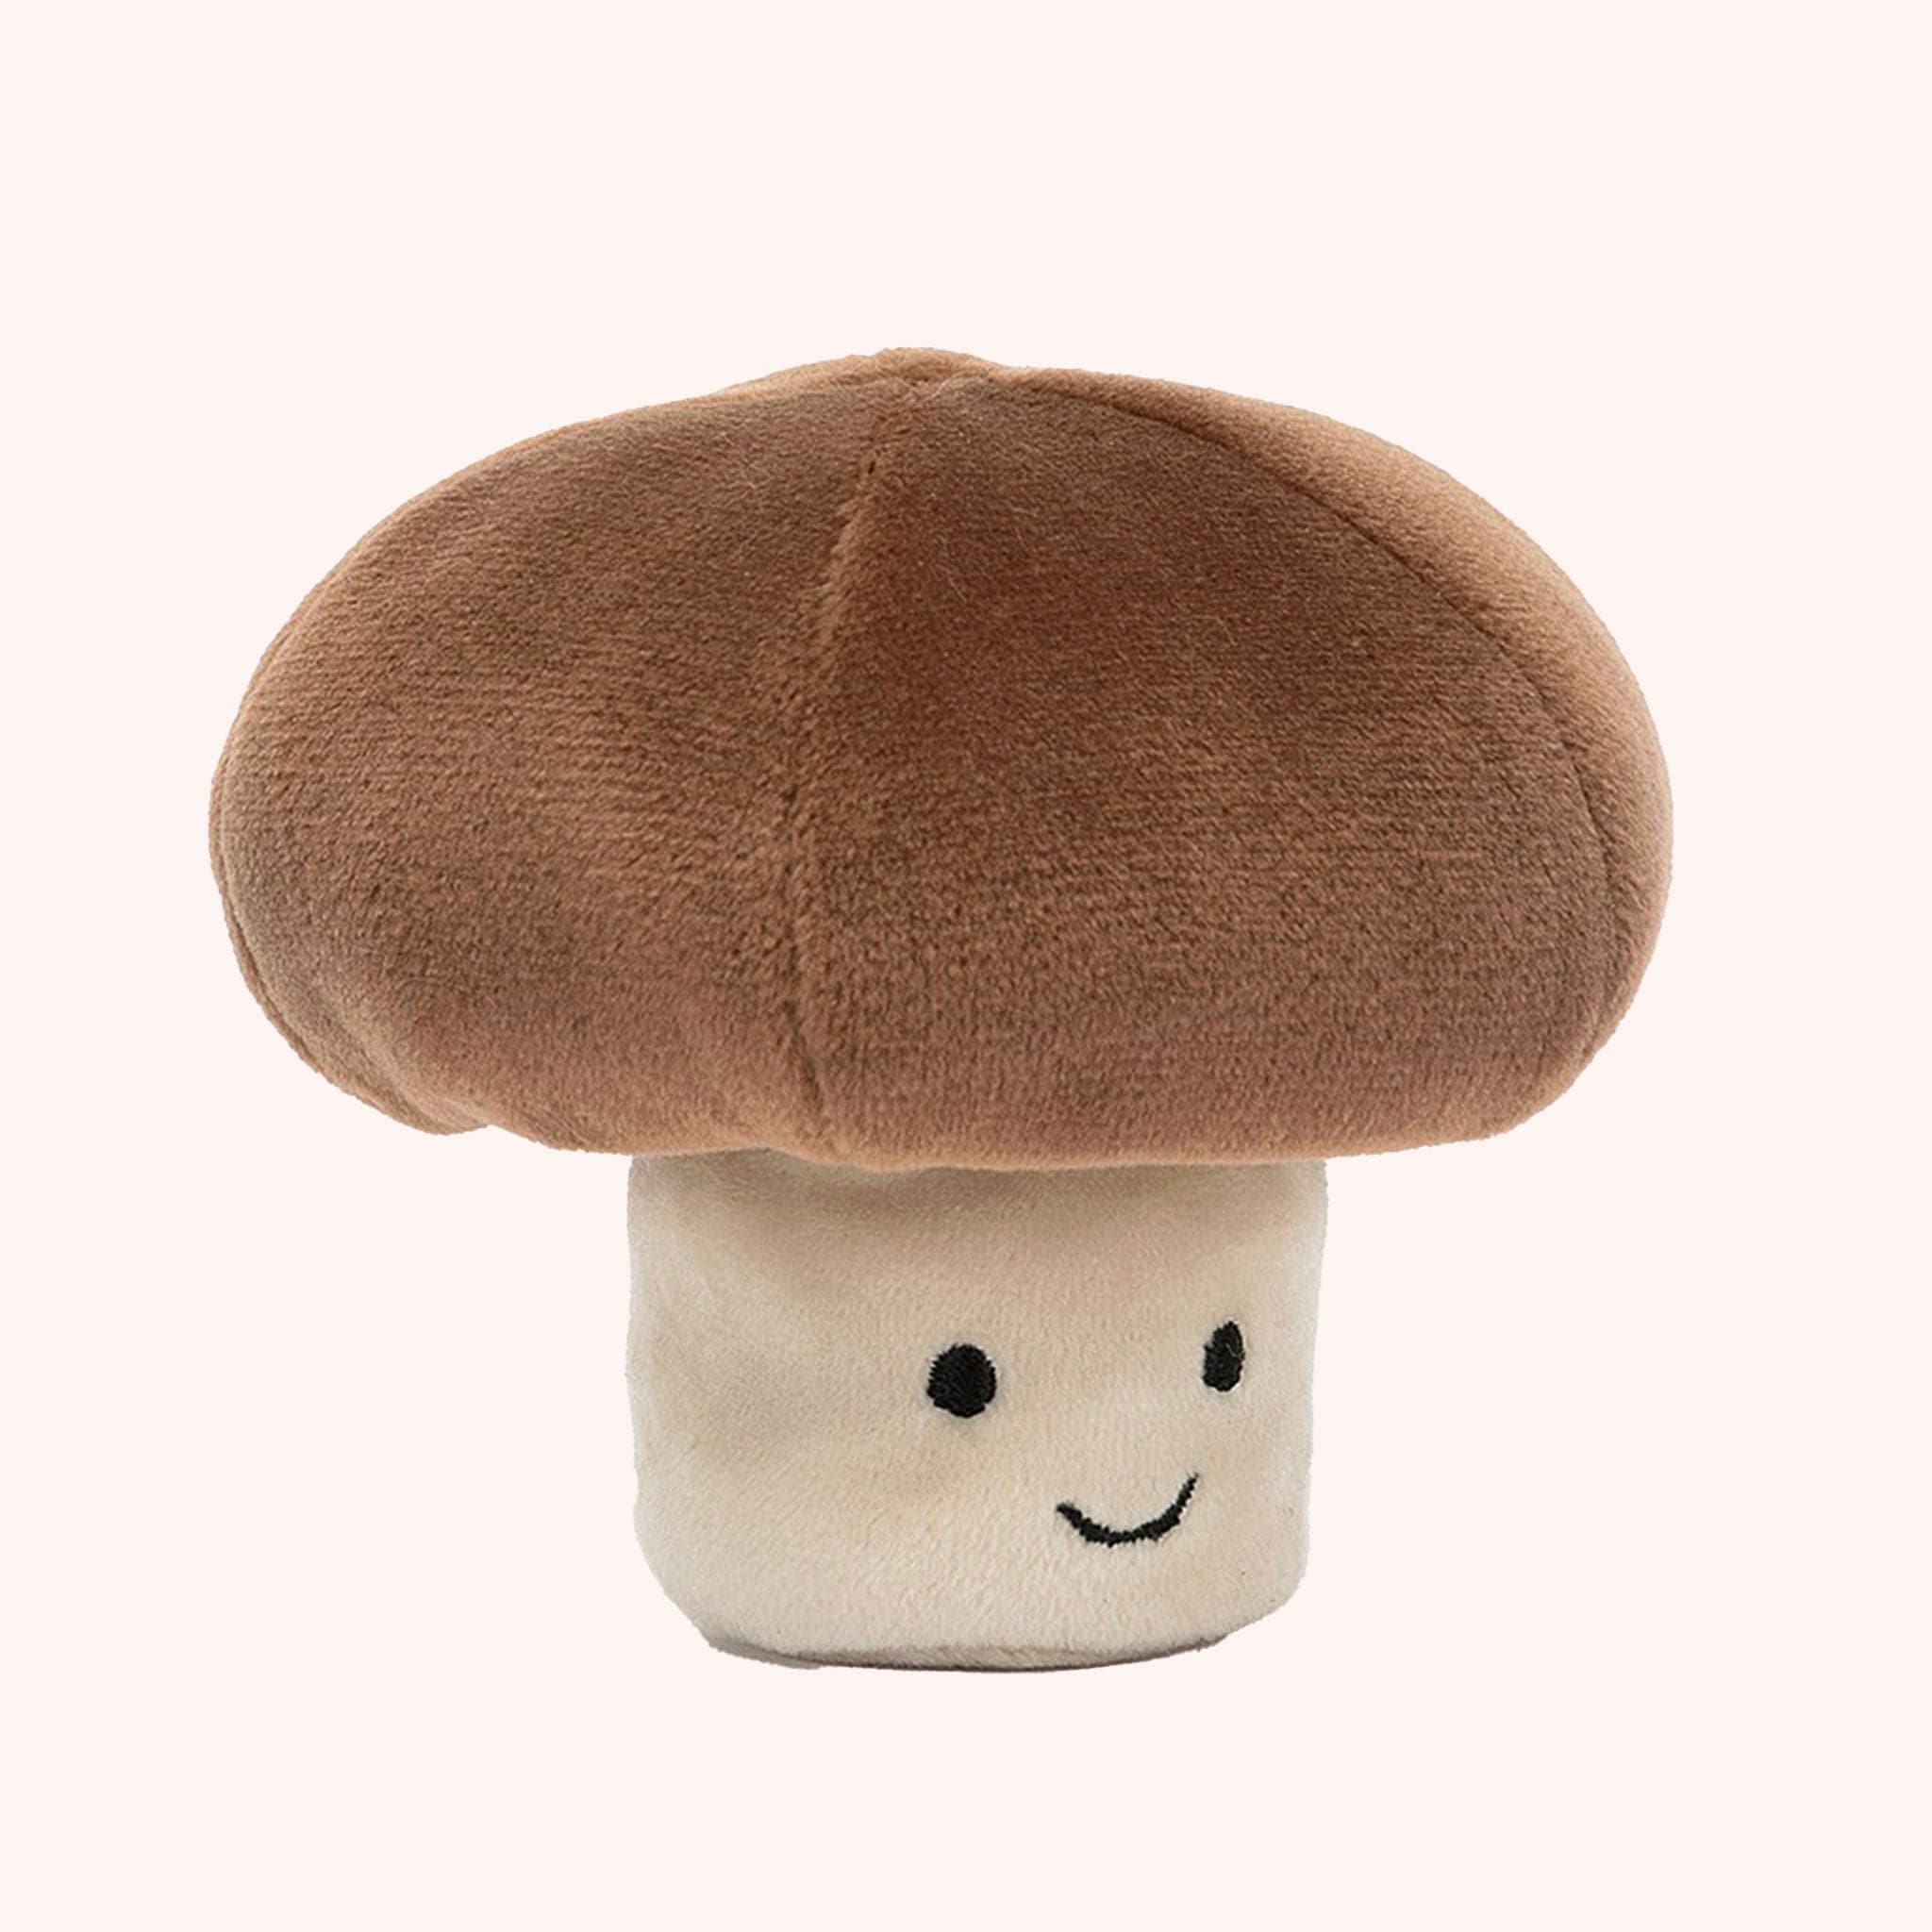 A sweet mushroom stuffed toy with a brown top and a light beige stem along with a smiling face.